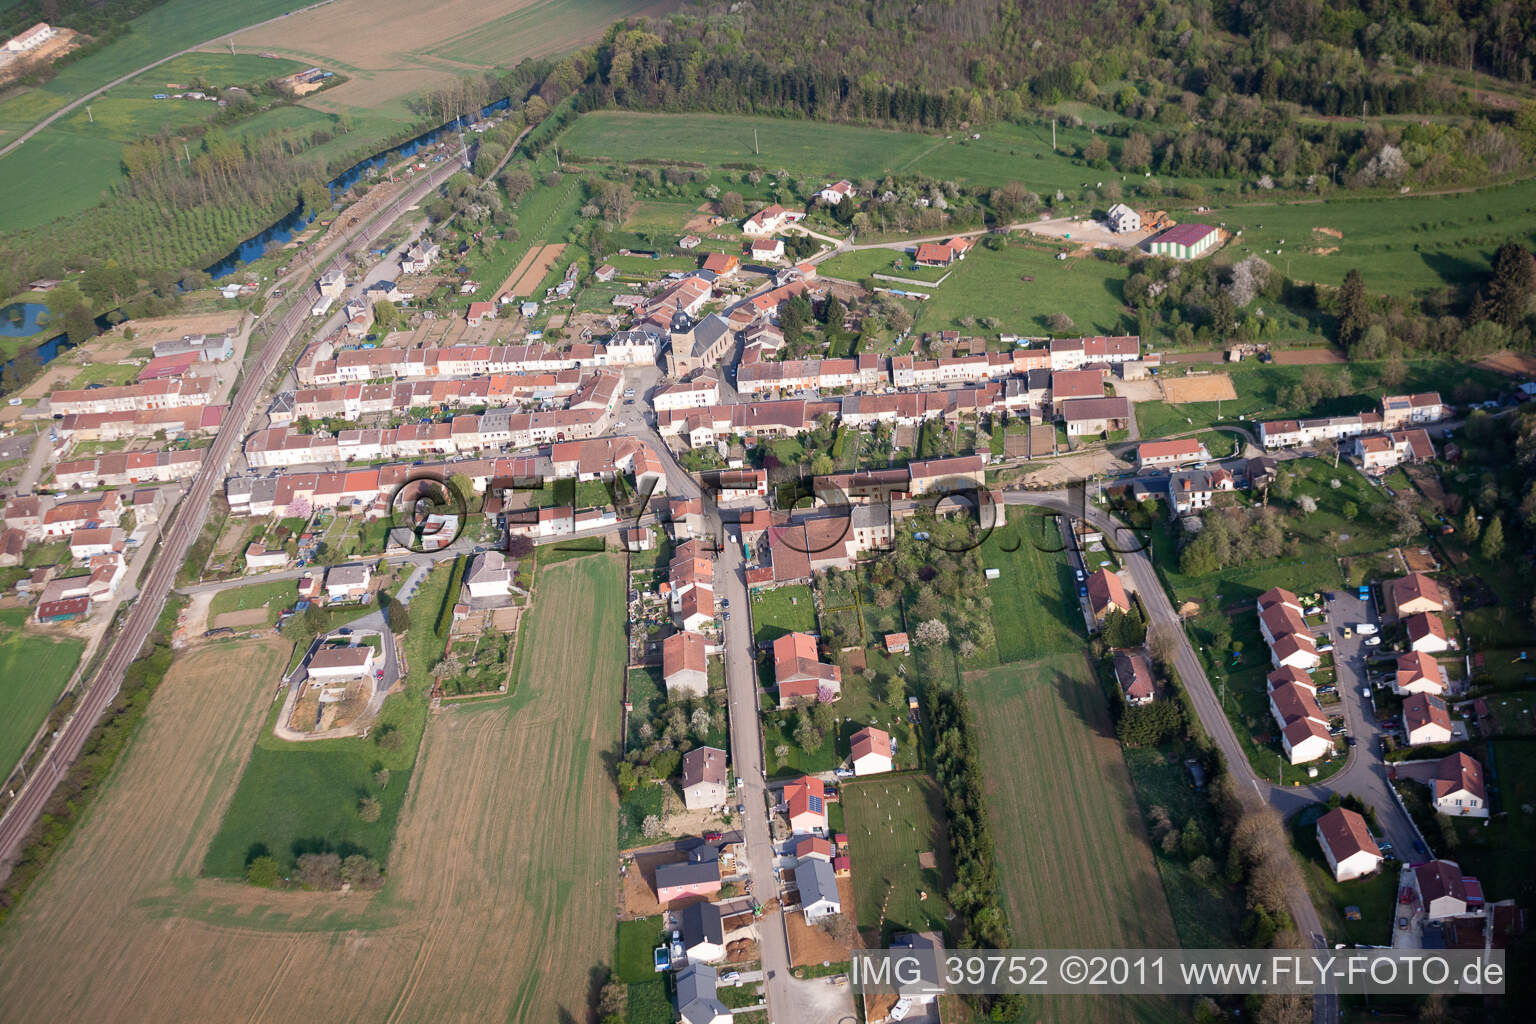 Village - view on the edge of agricultural fields and farmland in Charency-Vezin in Grand Est, France